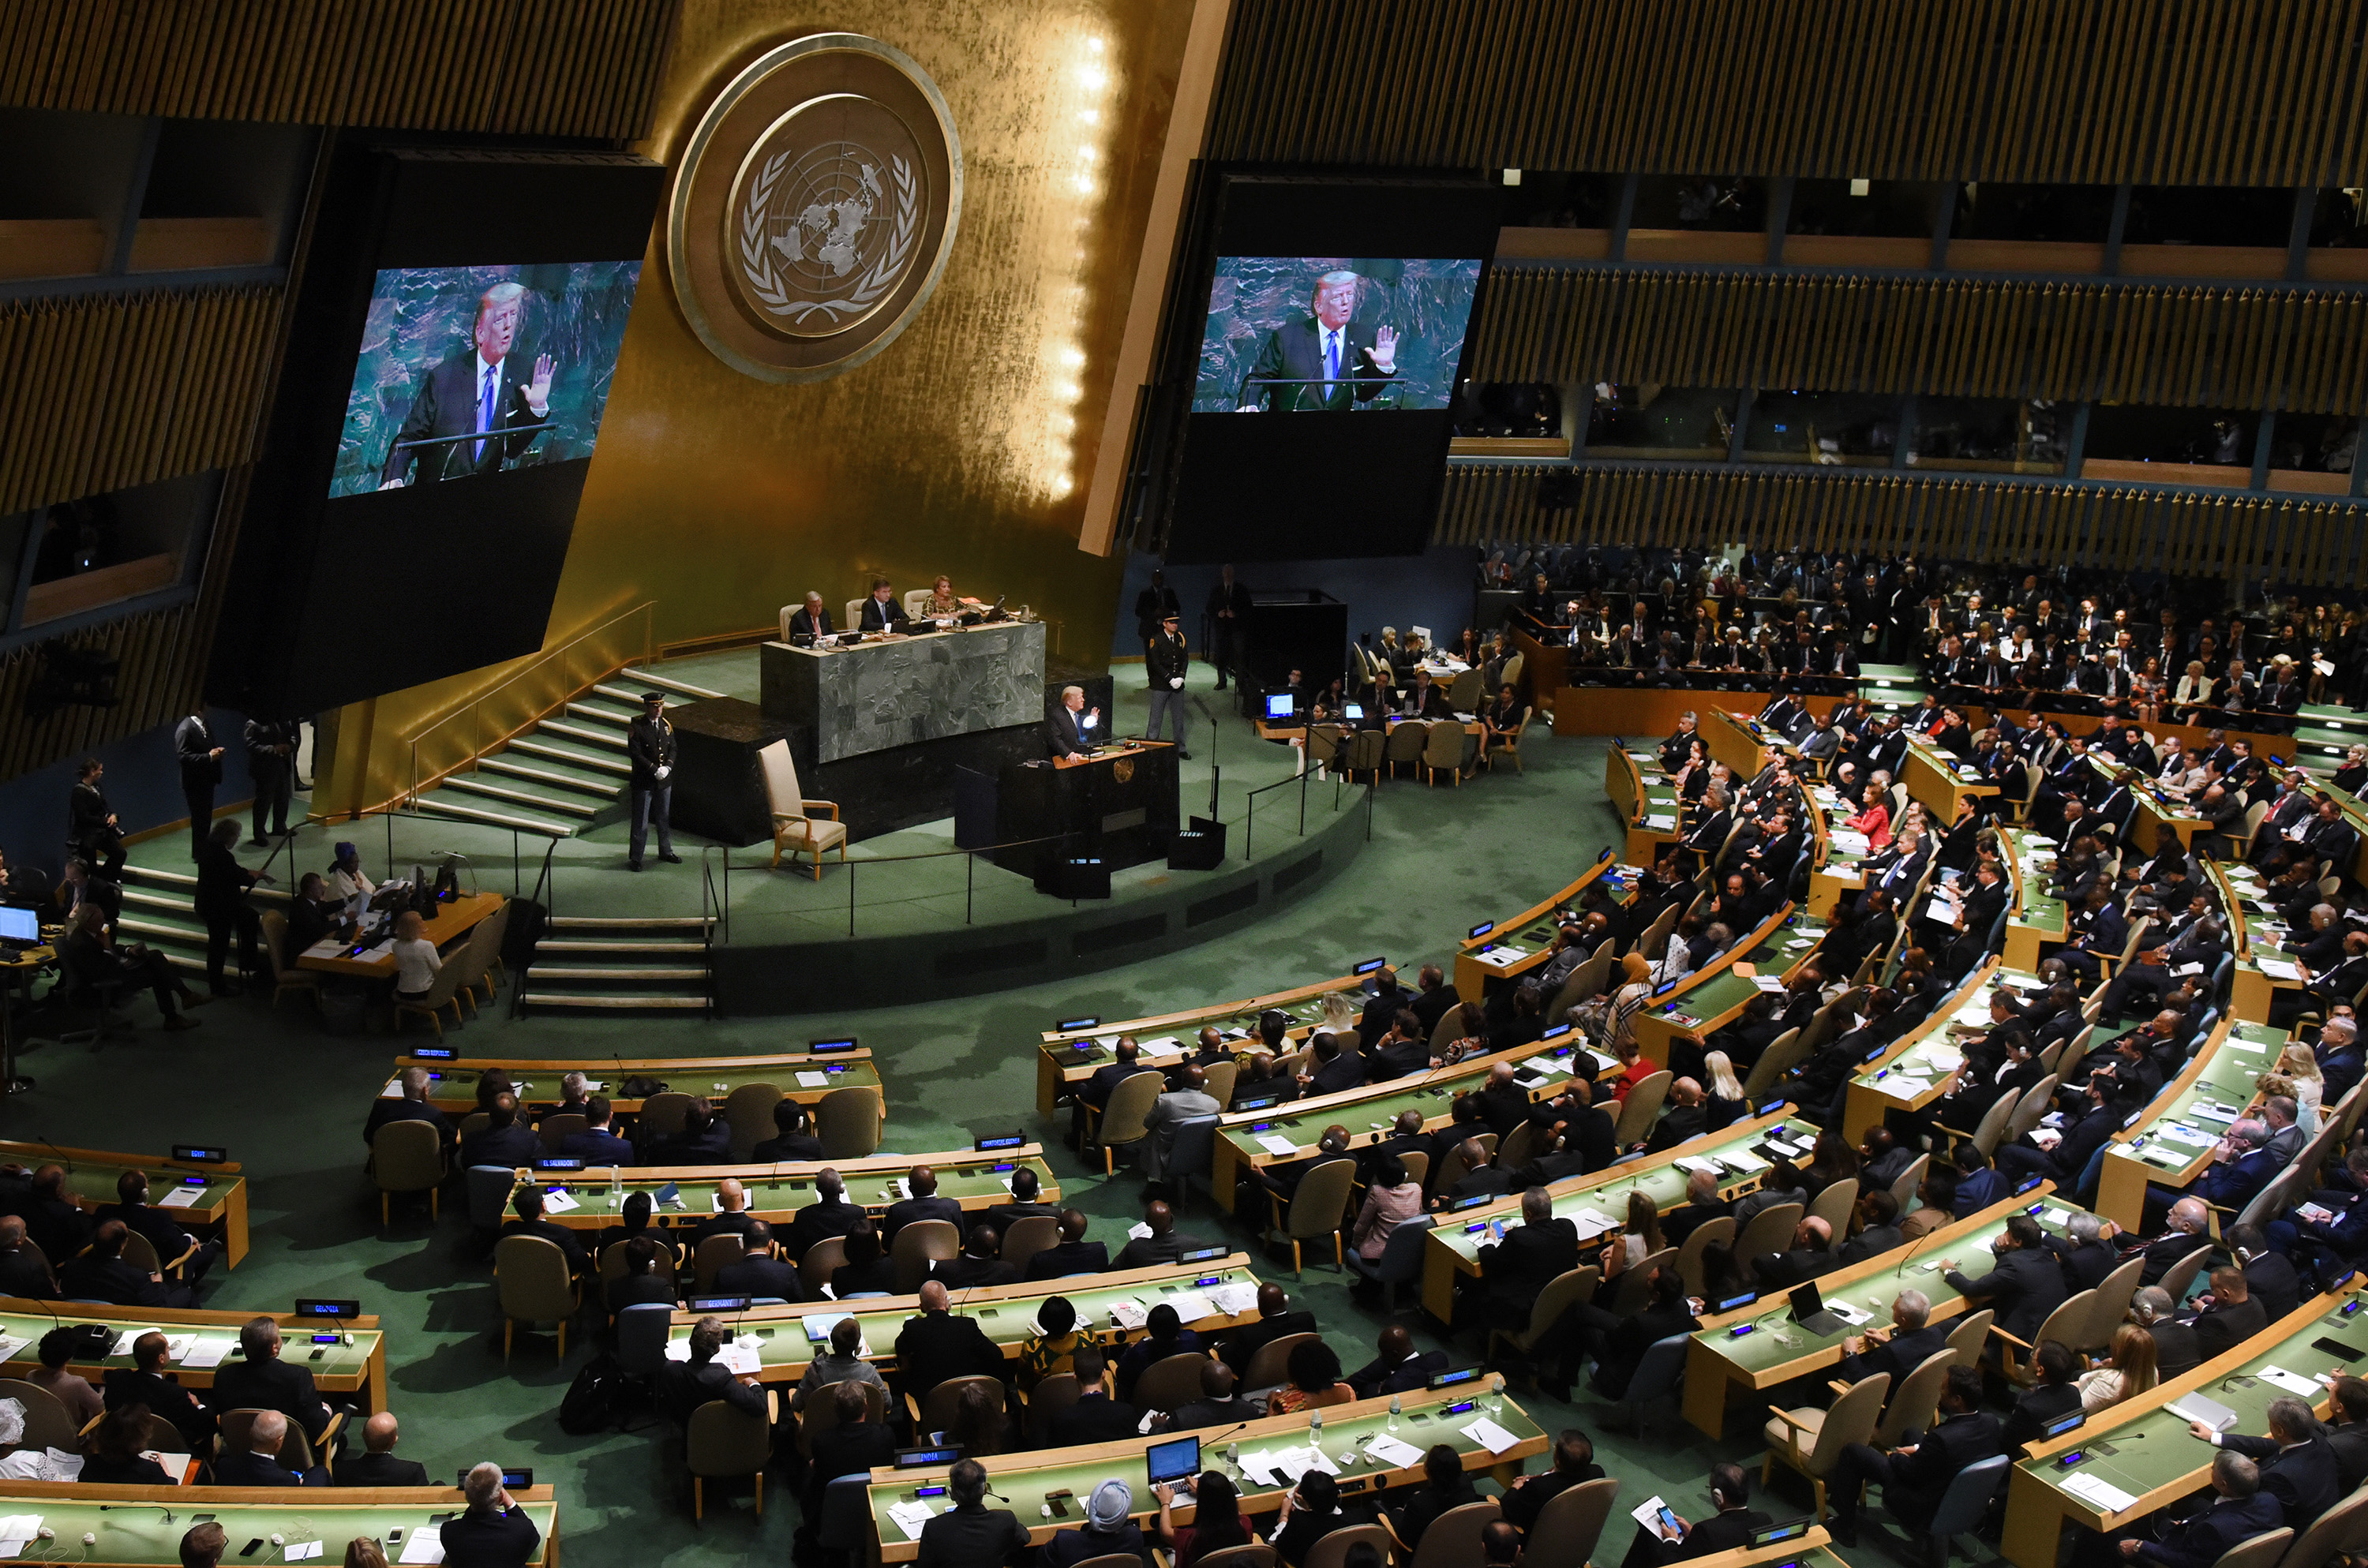 72nd assembly of the United Nations – The Eagle Eye